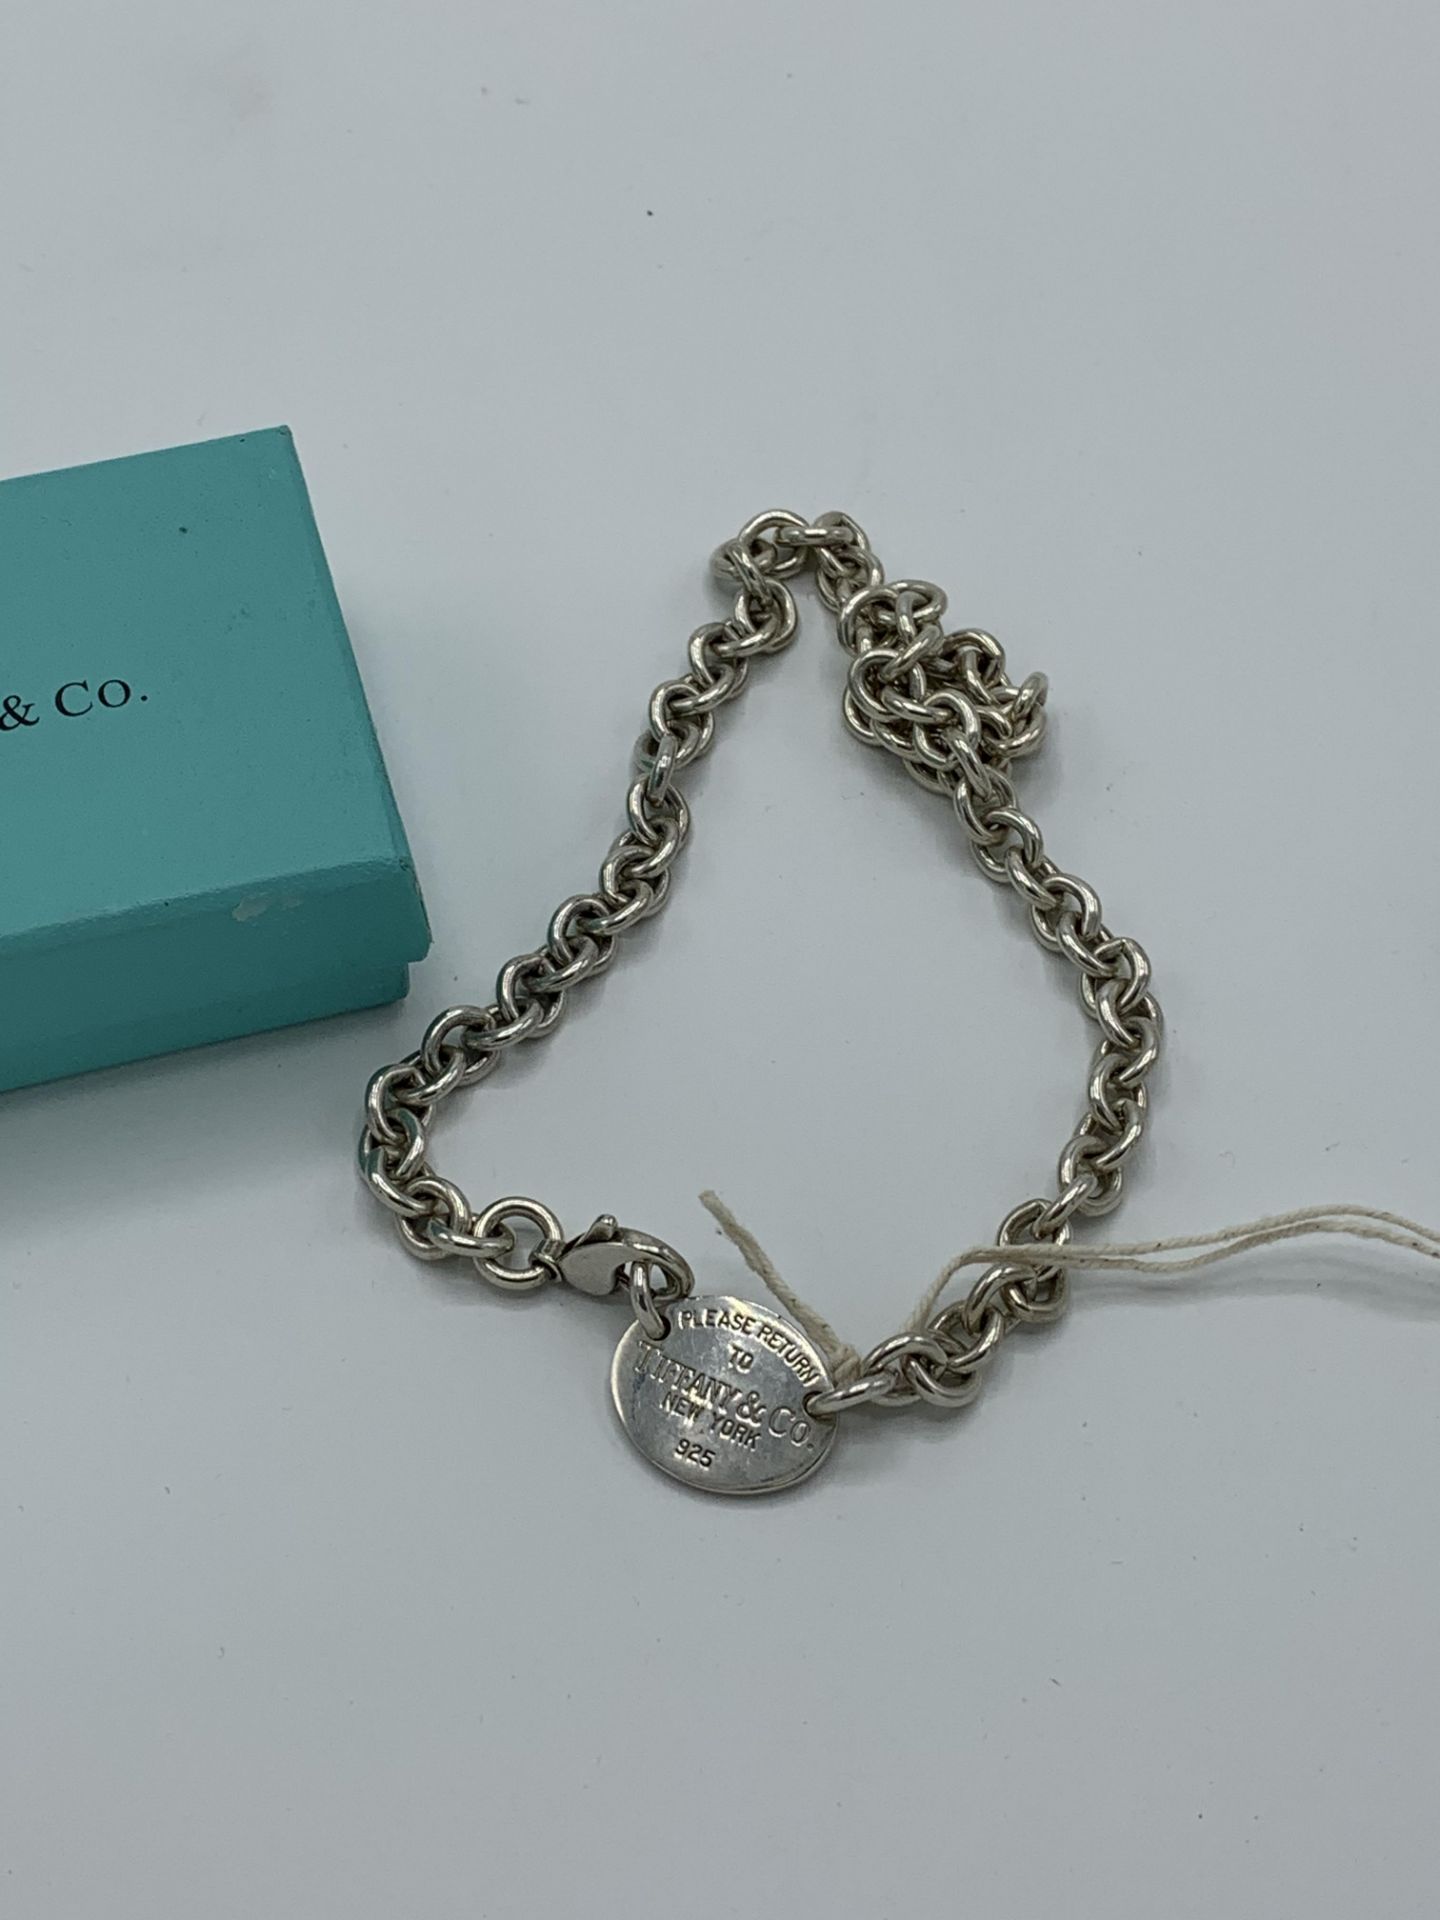 925 silver Tiffany necklace complete with label marked ""please return to Tiffany & Co New York"" - Image 3 of 3